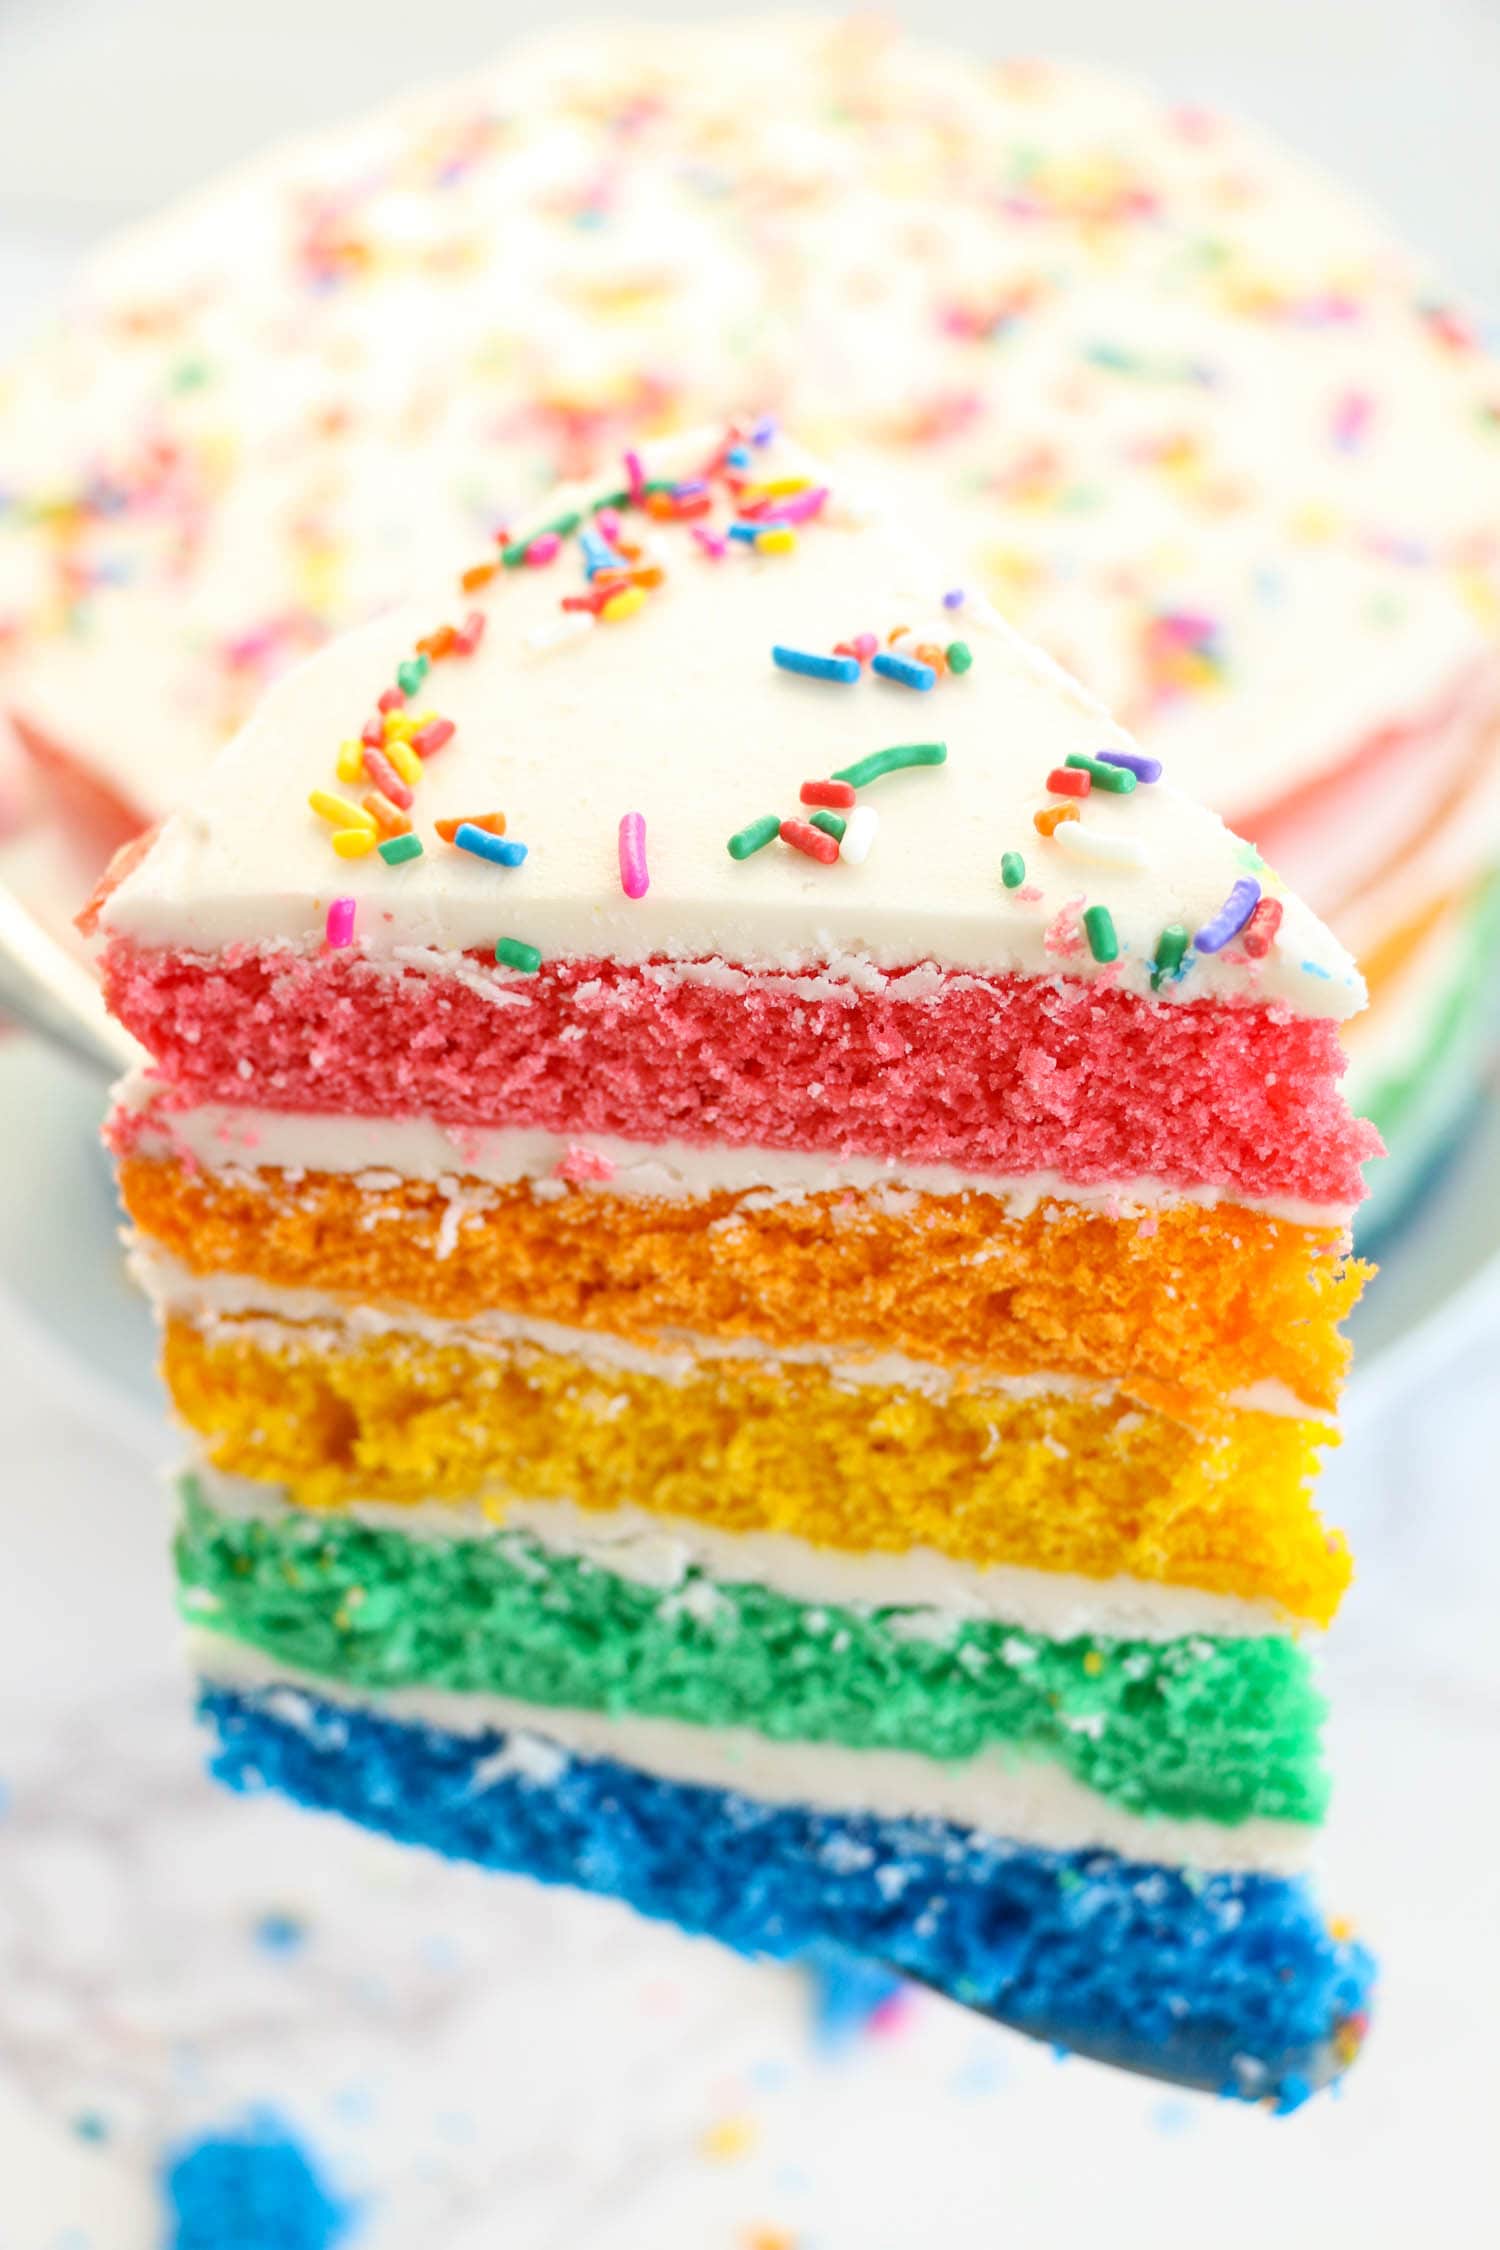 Showing a slice of the rainbow cake